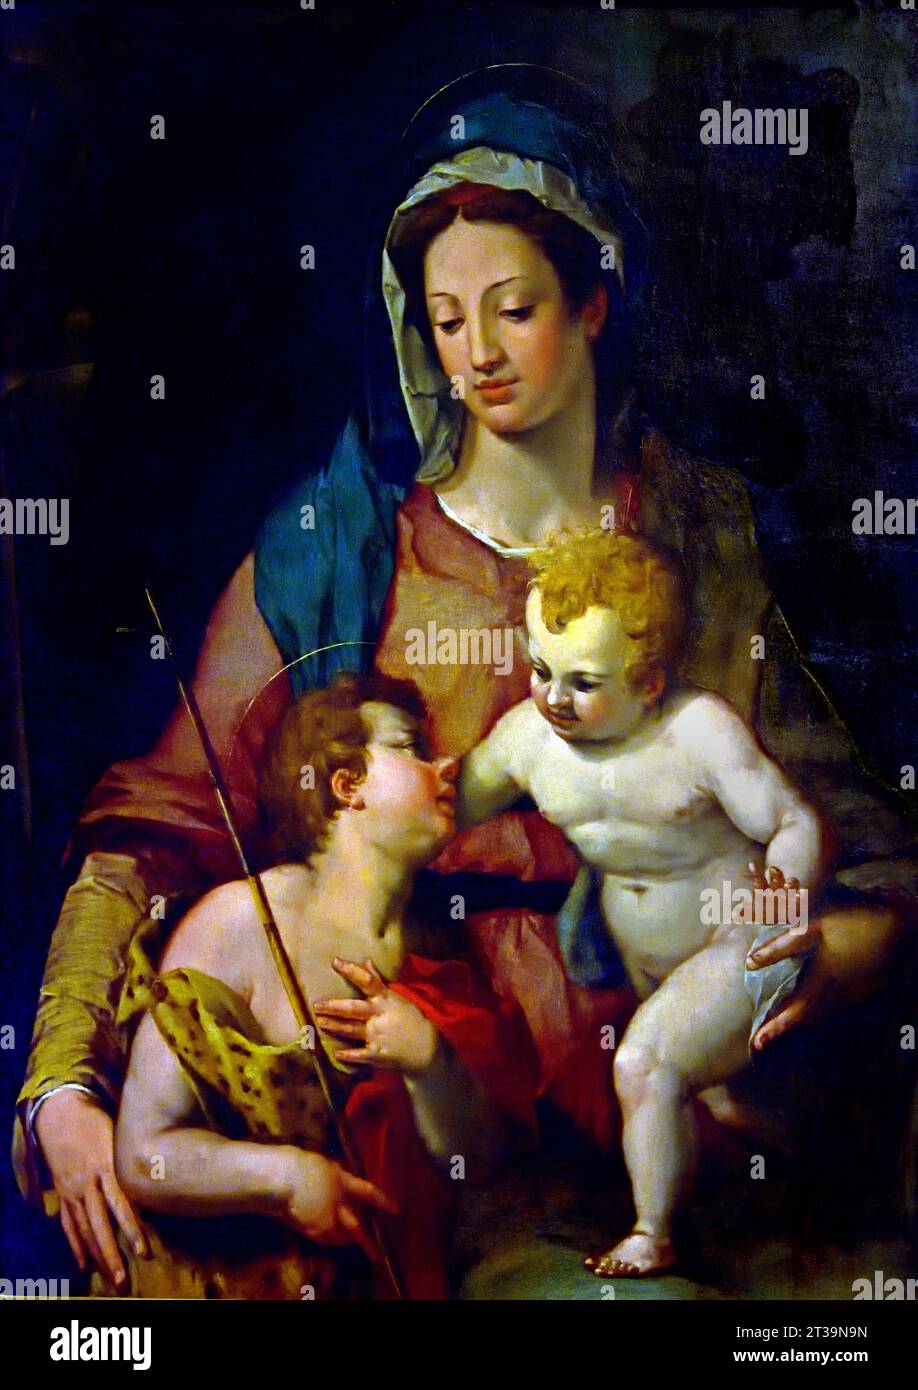 Madonna and Child with Little St. John the Baptist 1585  Pieter de Witte 1548 - 1628  Museum, Italy. Peter de Witte, known in Italy as Pietro Candido and in Bavaria as Peter Candid was a Flemish-born Mannerist painter, tapestry designer and draughtsman active in Italy and Bavaria. Stock Photo